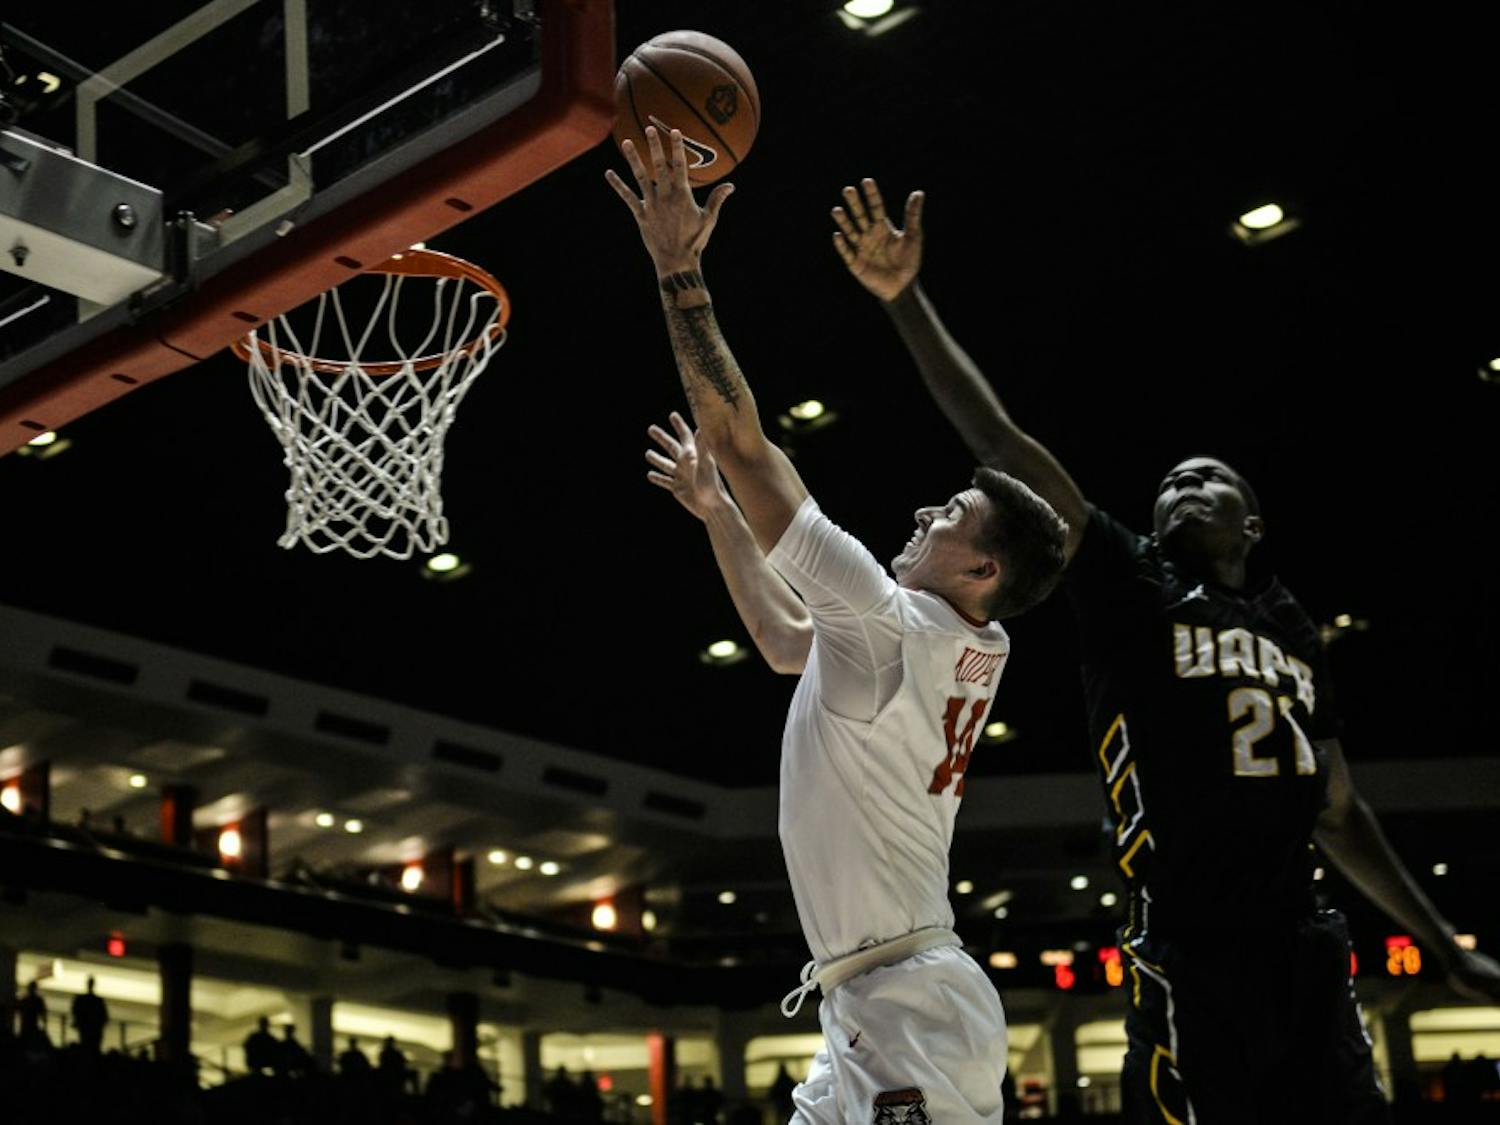 Sophomore guard Dane Kuiper leaps up to the net while playing against Arkansas-Pine Bluff Saturday, Dec. 17, 2016 at WisePies Arena. 